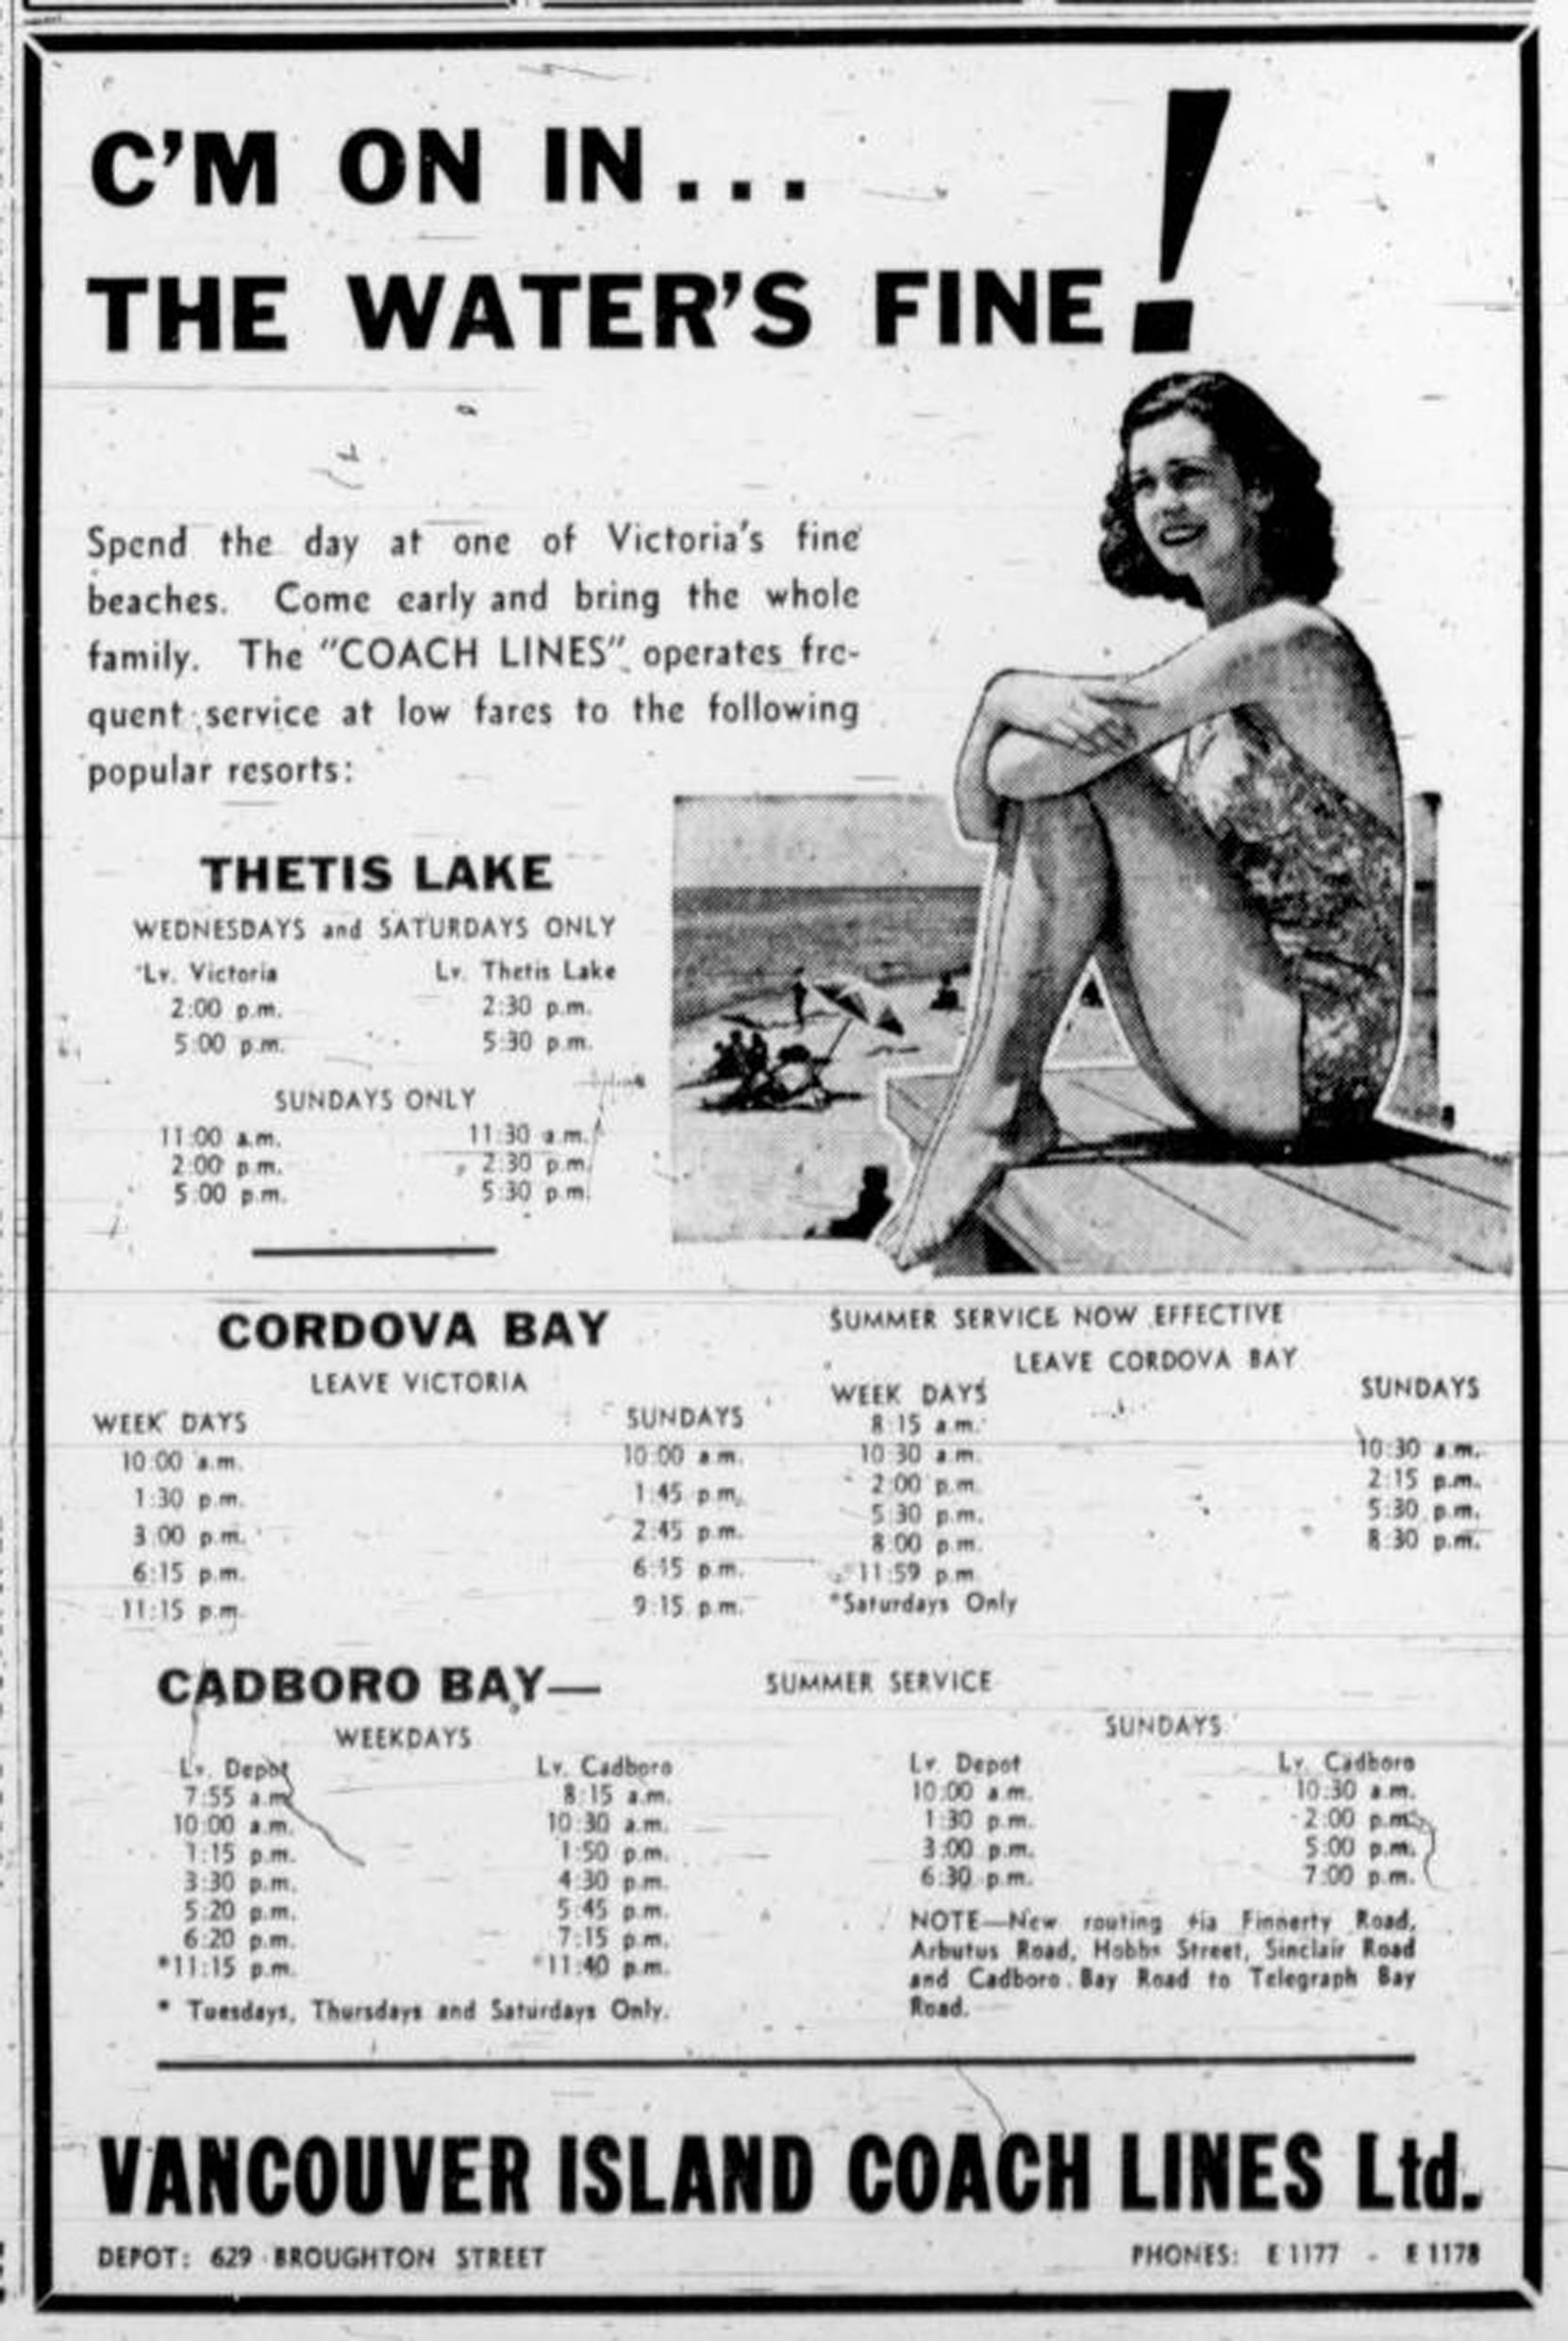 1940 Vancouver Island Coach Lines advertisement for Victoria beaches: Thetis Lake, Cordova Bay, Cadboro Bay (Victorian Online Sightseeing Tours collection)